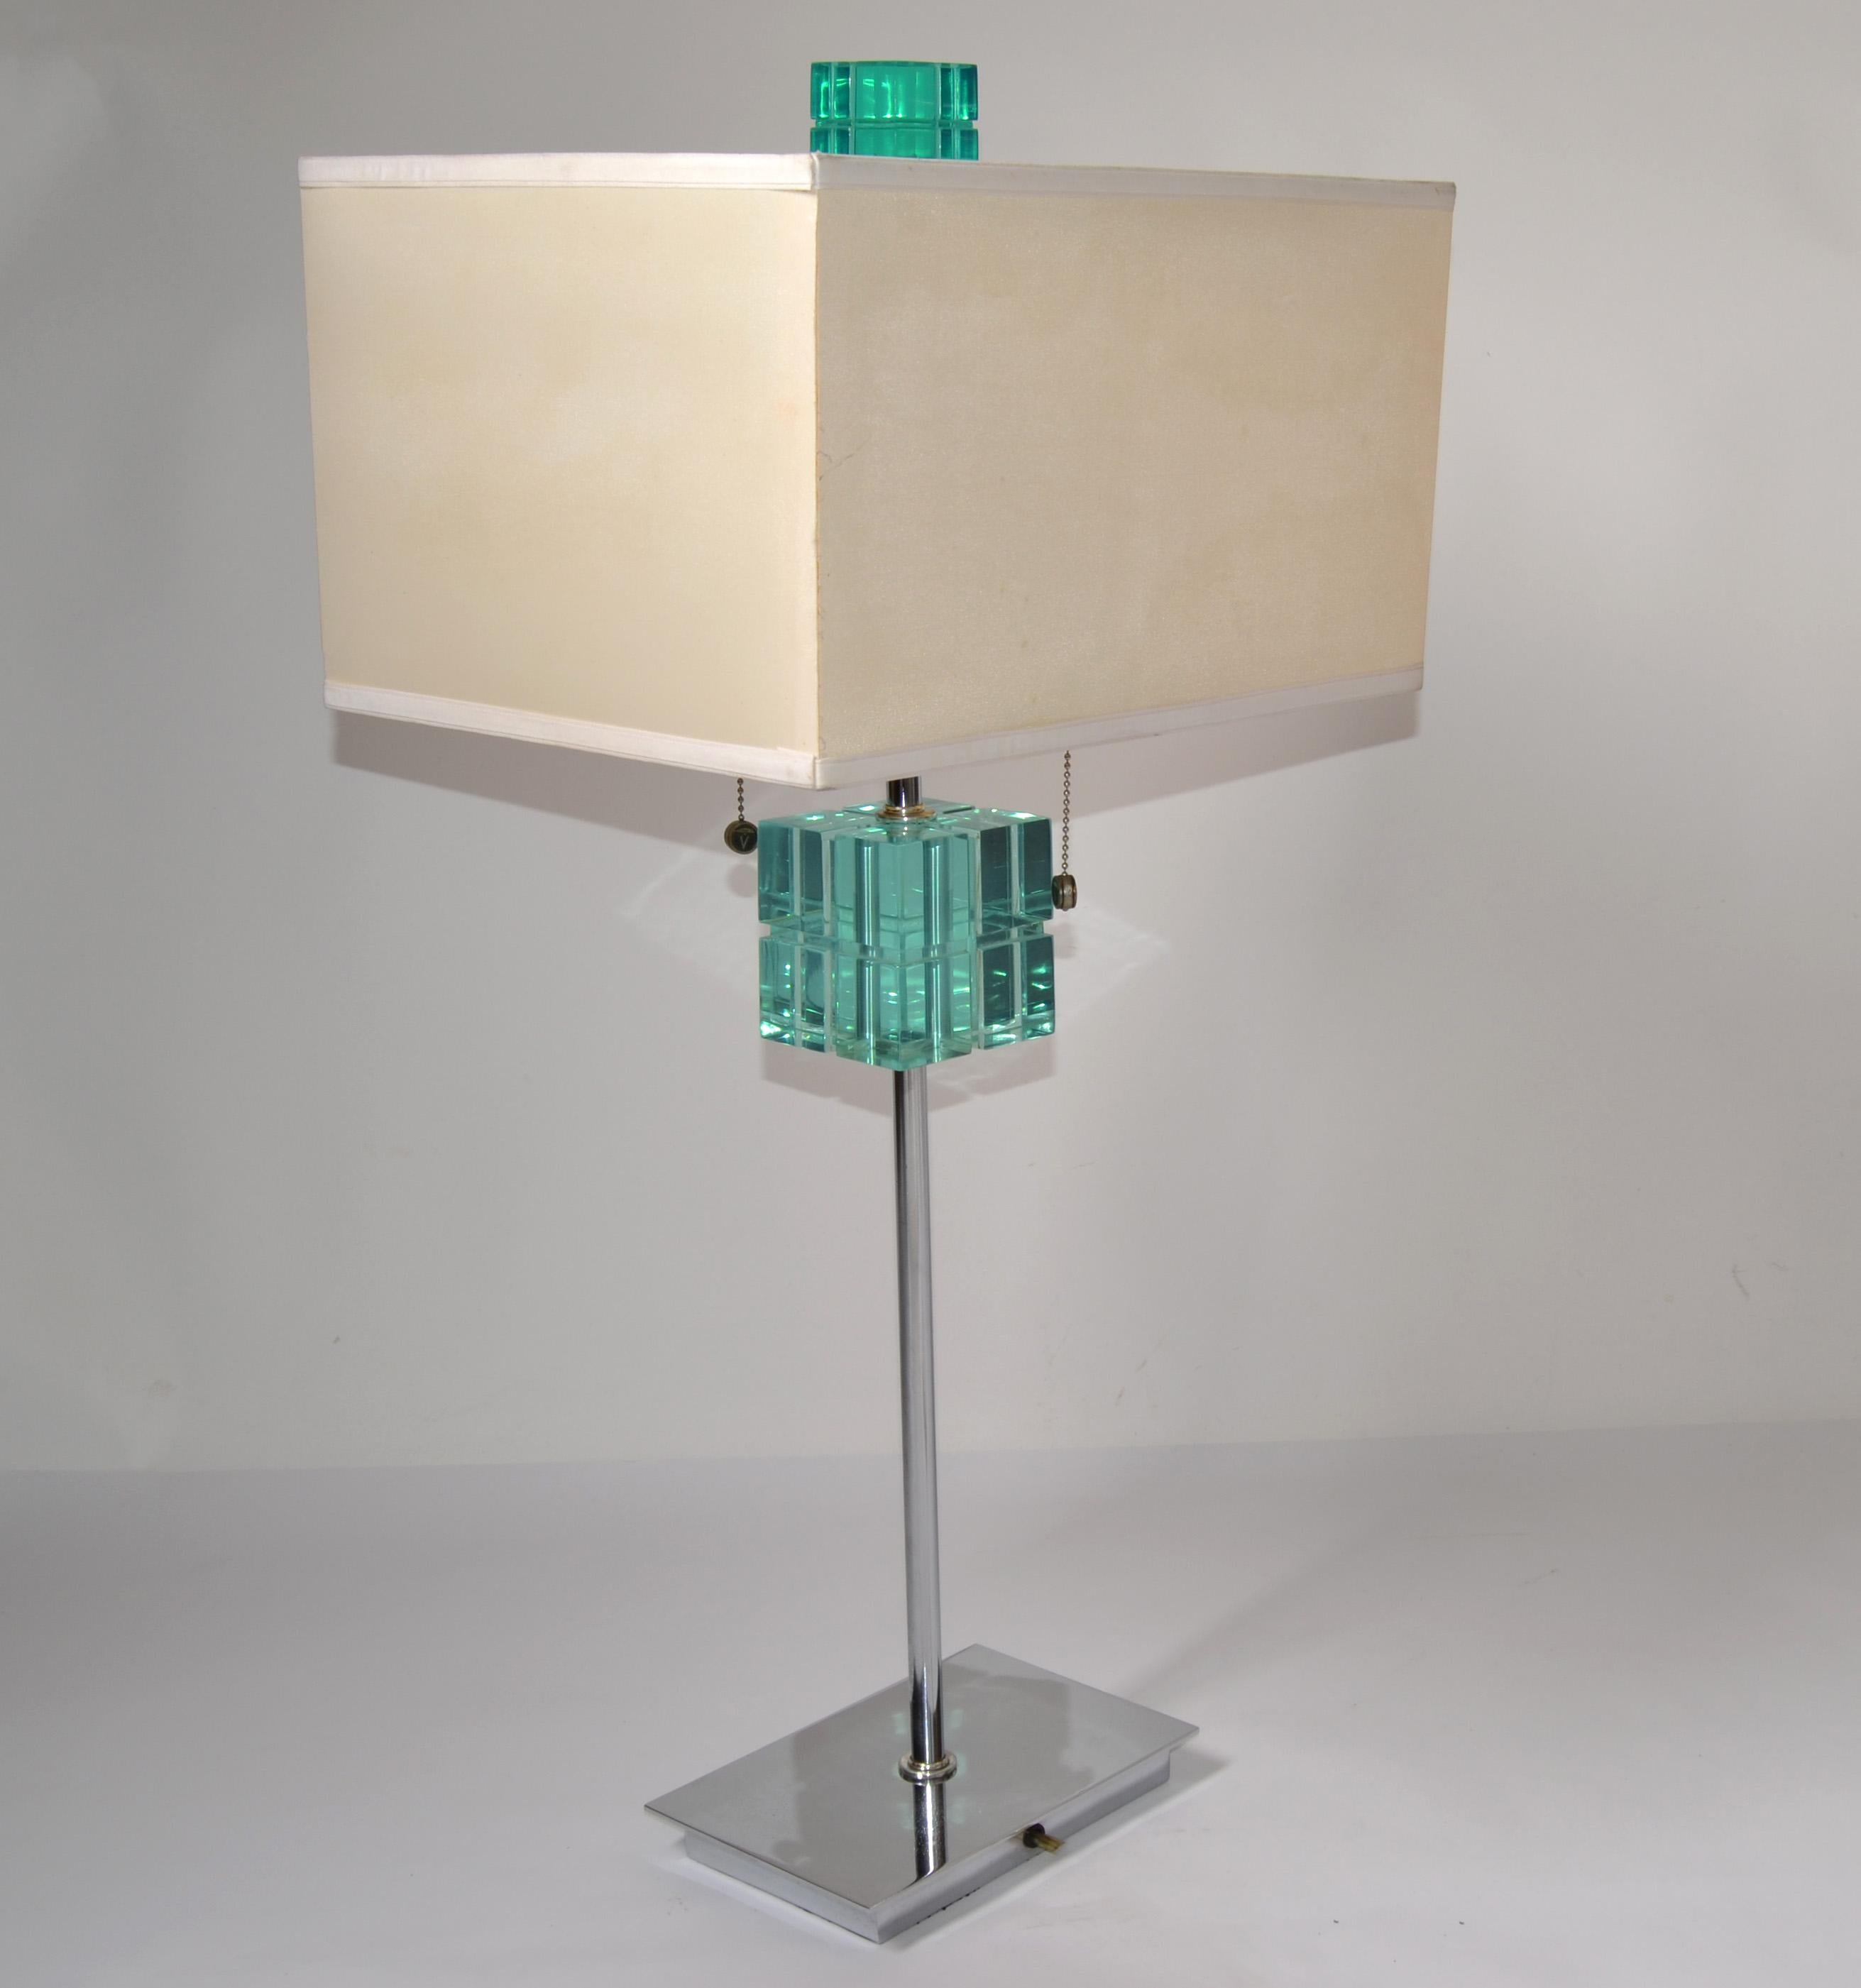 Hivo Van Teal Mid-Century Modern transparent emerald green Lucite and Chrome table lamp with rectangle beige fabric shade.
Nickel hardware with S- double cluster sockets and pull cords. US wired, UL Listing and in working condition.
Marked at the